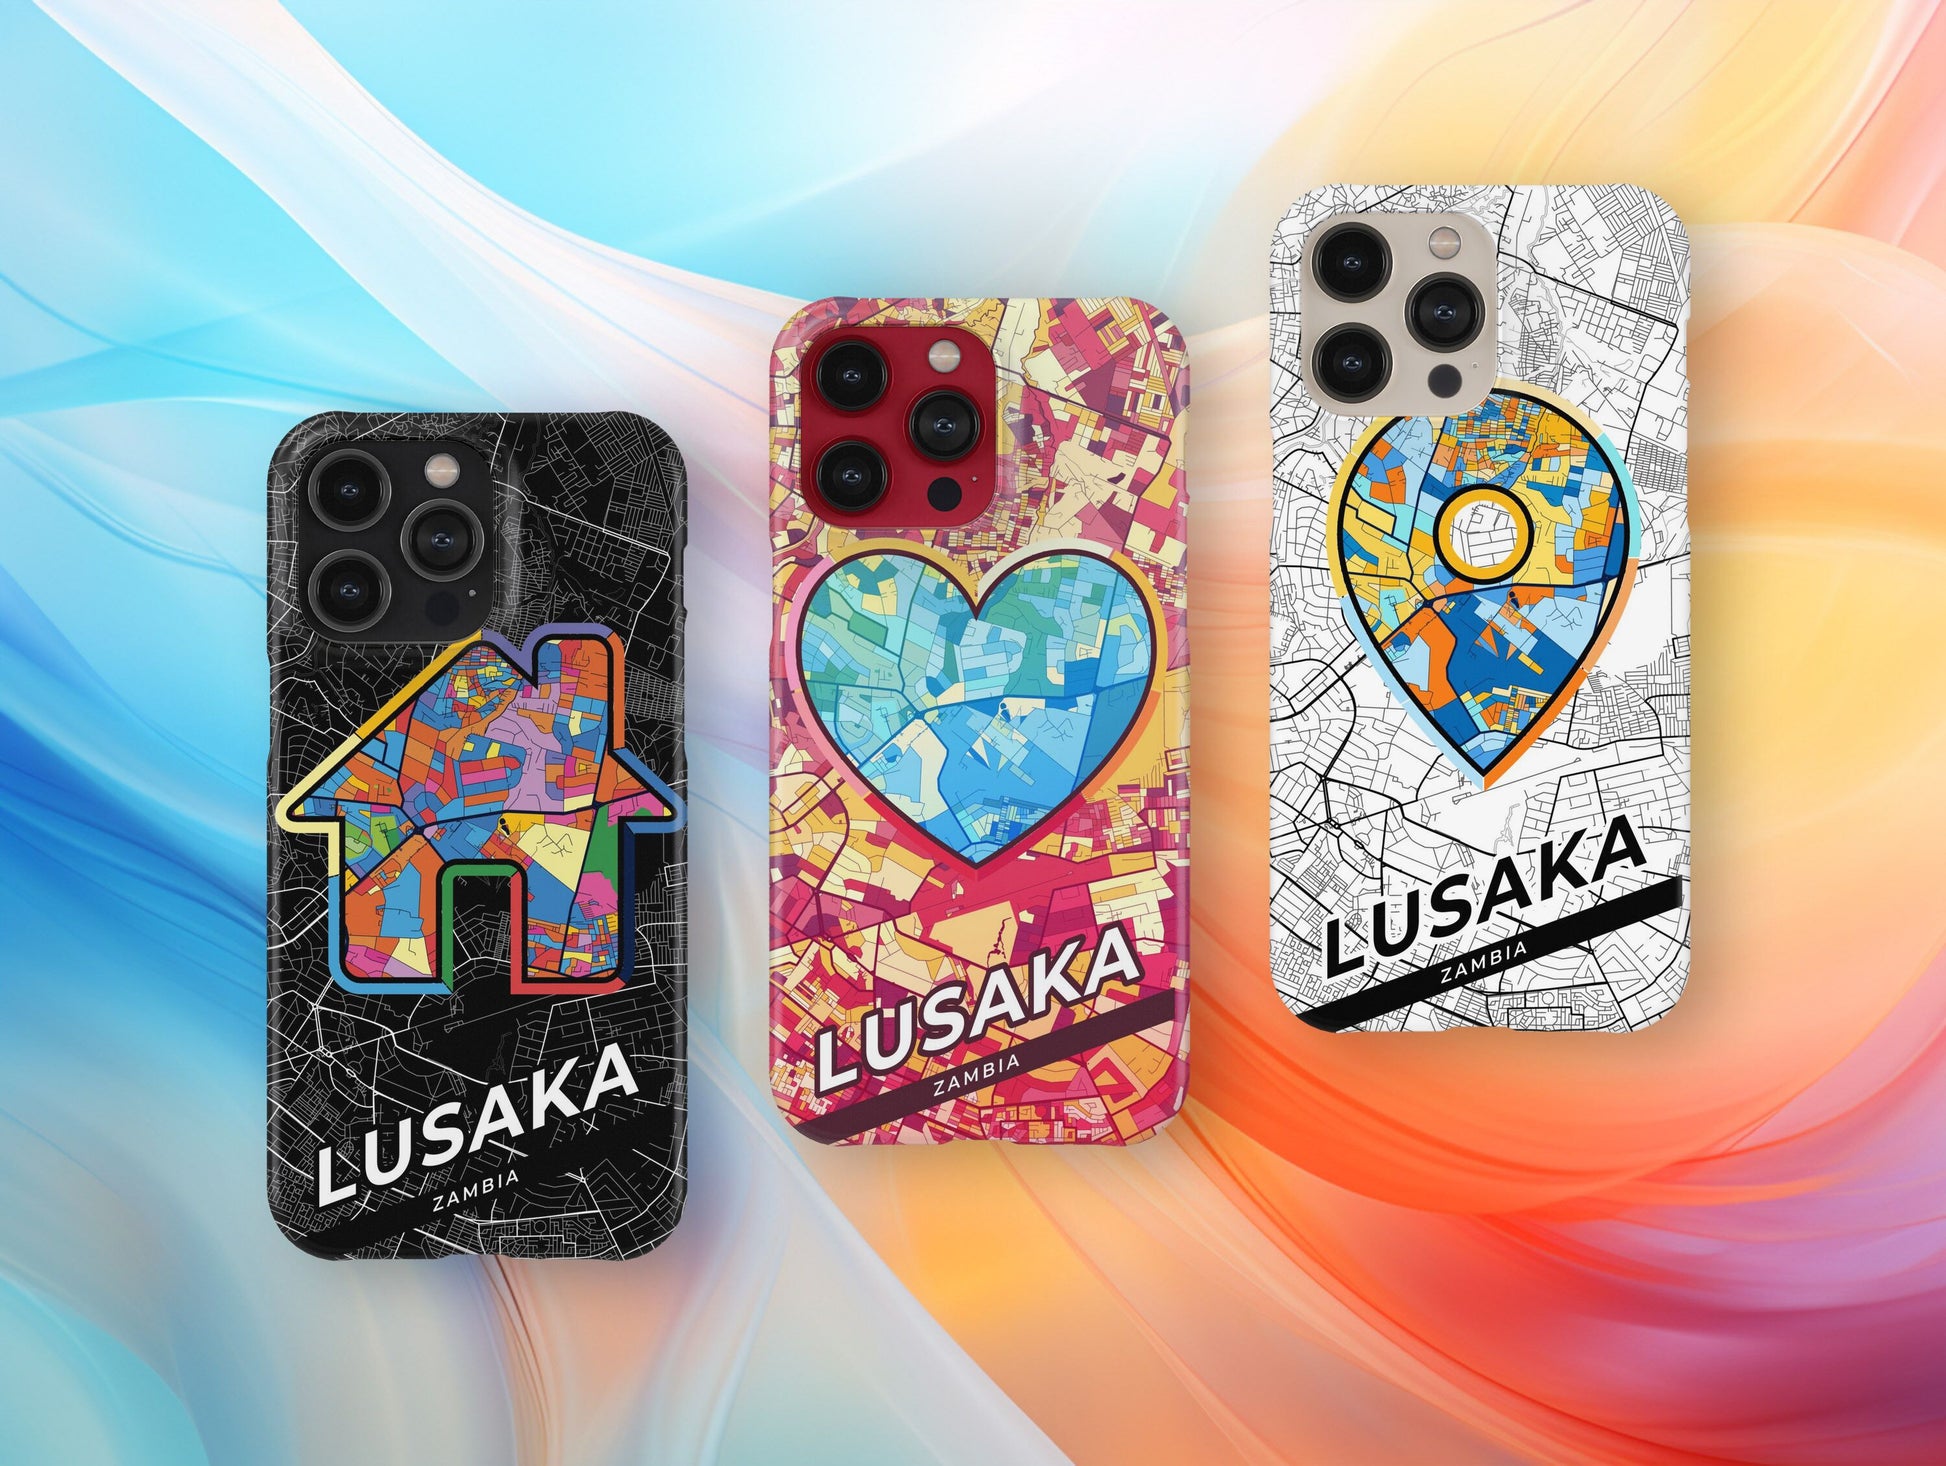 Lusaka Zambia slim phone case with colorful icon. Birthday, wedding or housewarming gift. Couple match cases.